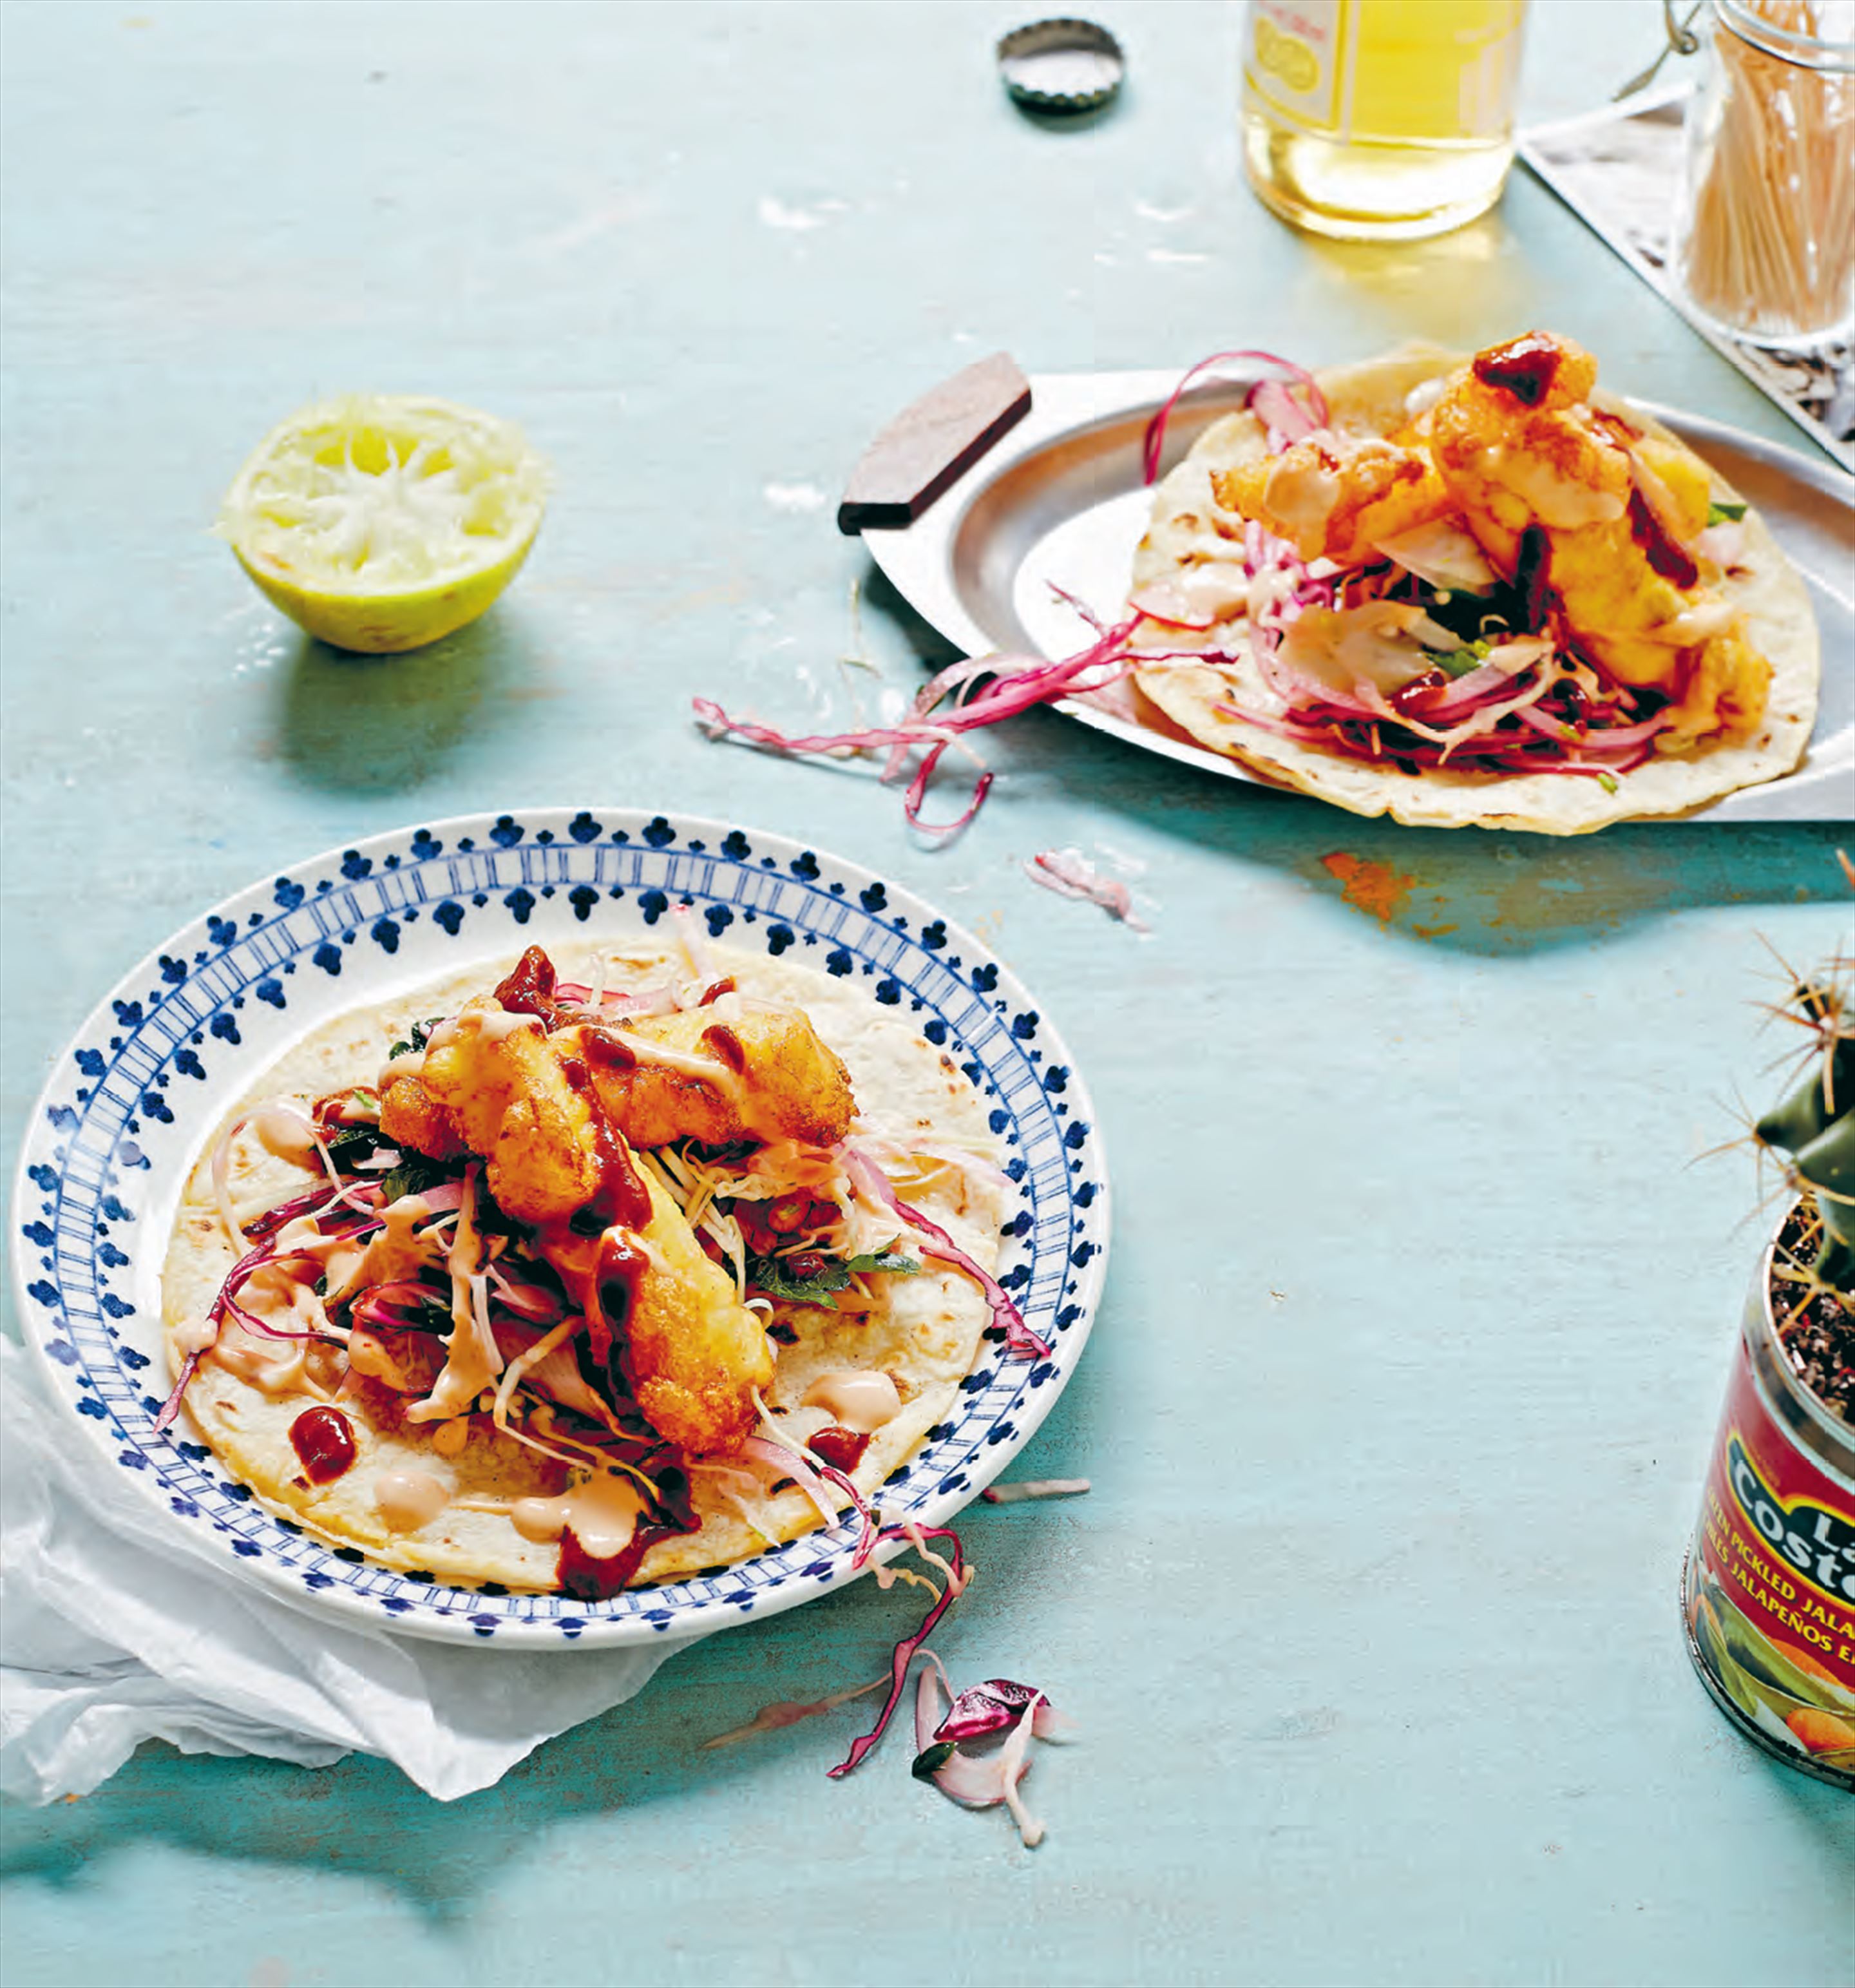 Mr Wilson’s fish tacos with slaw & two sauces